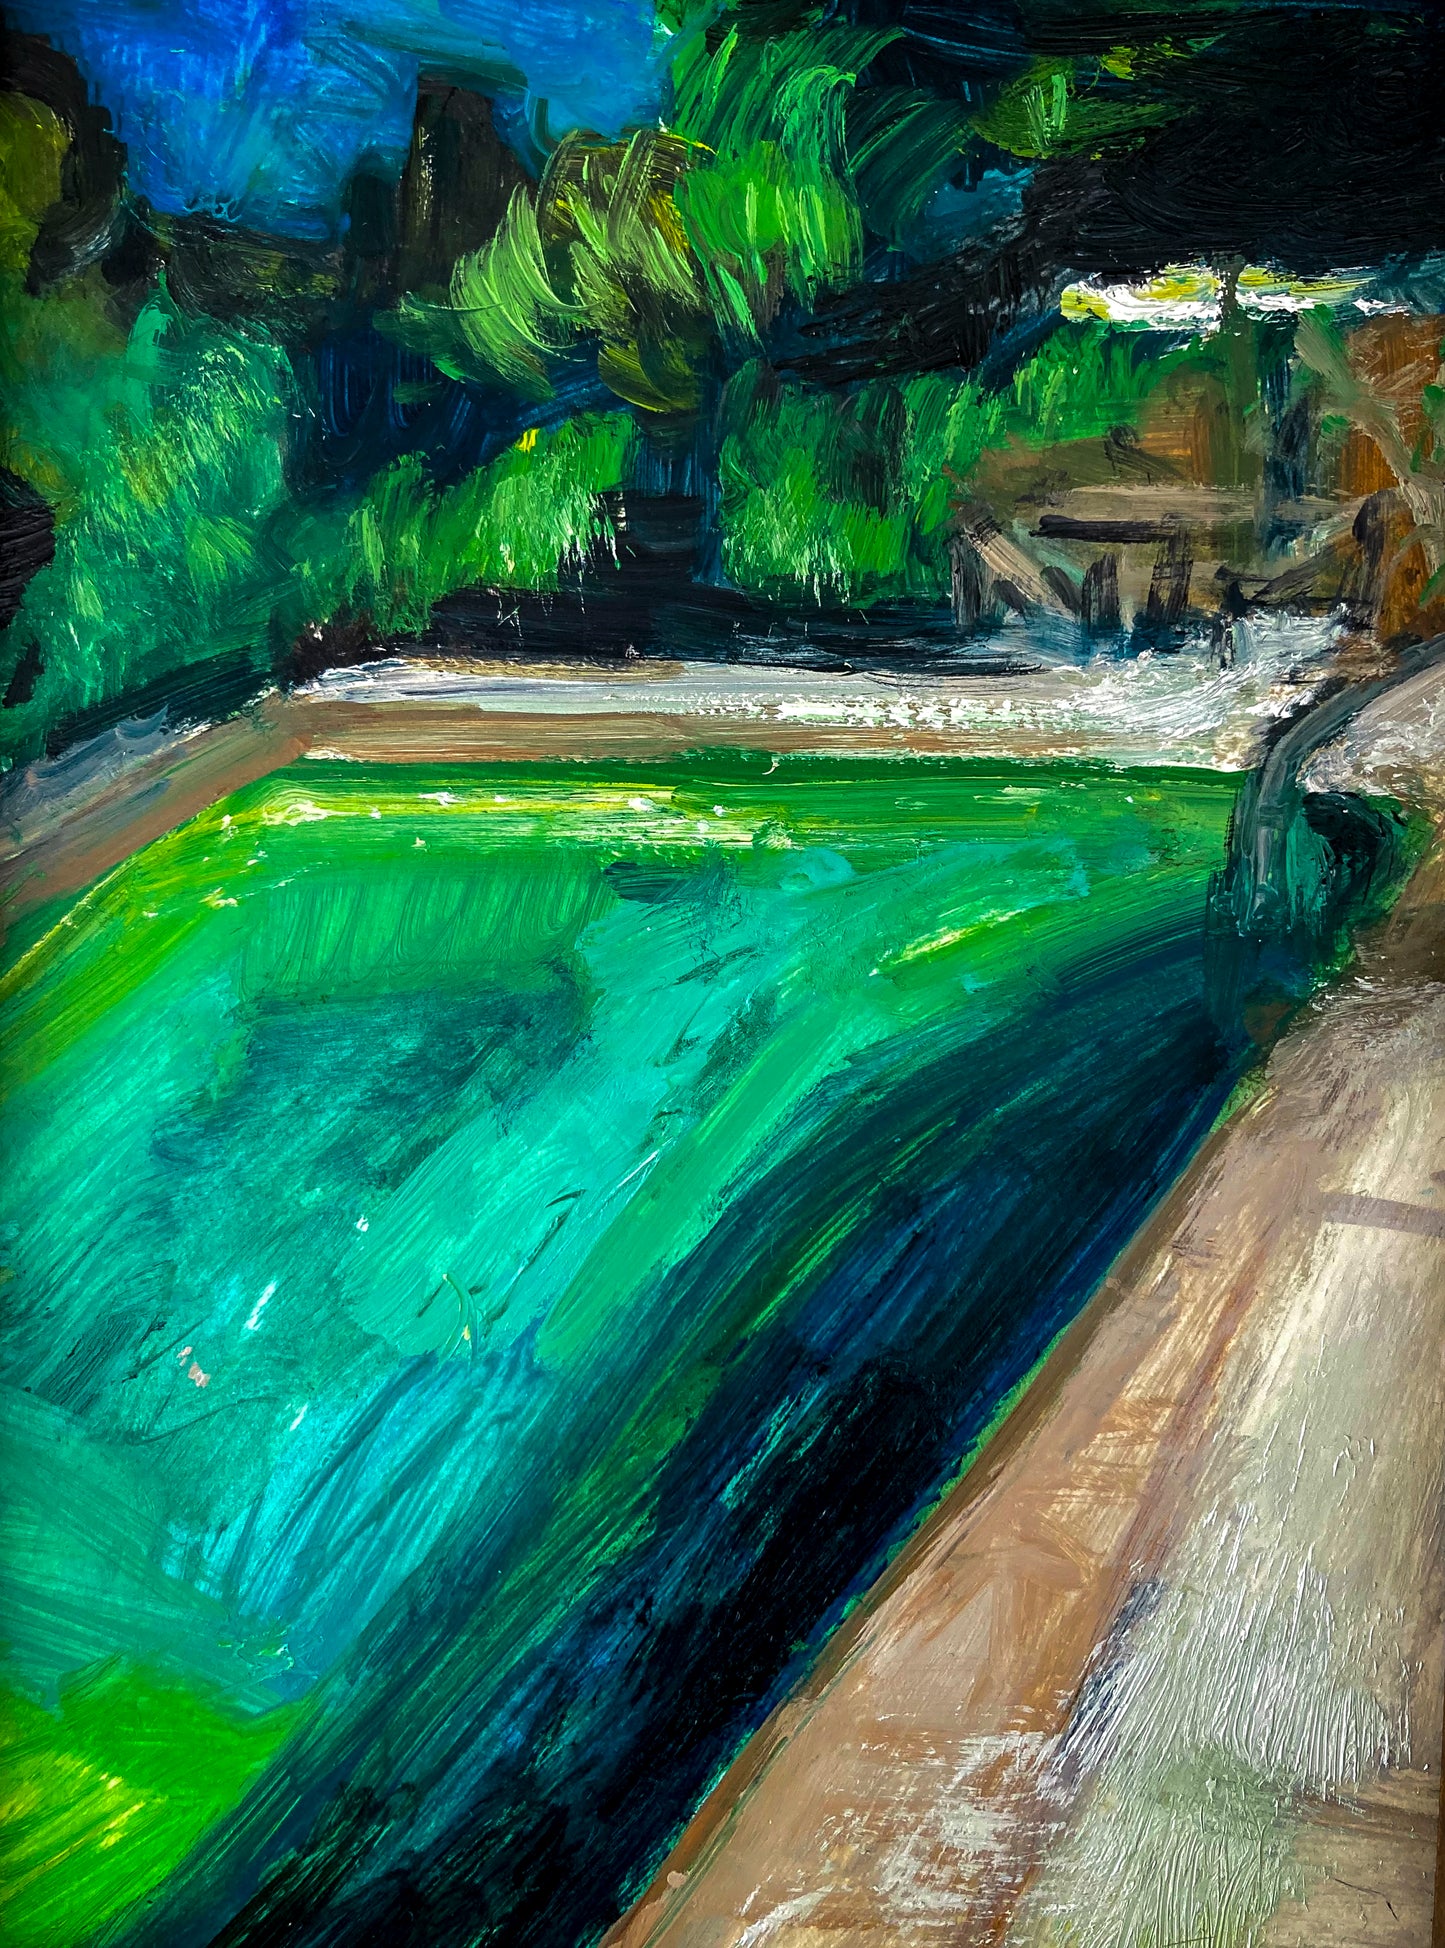 Colorful oil painting on paper; back view of pool at night; vibrant blues and greens and impression of lights and umbrella in background; 6"x8" image with 3" dark wood frame; artist E.E. Jacks;